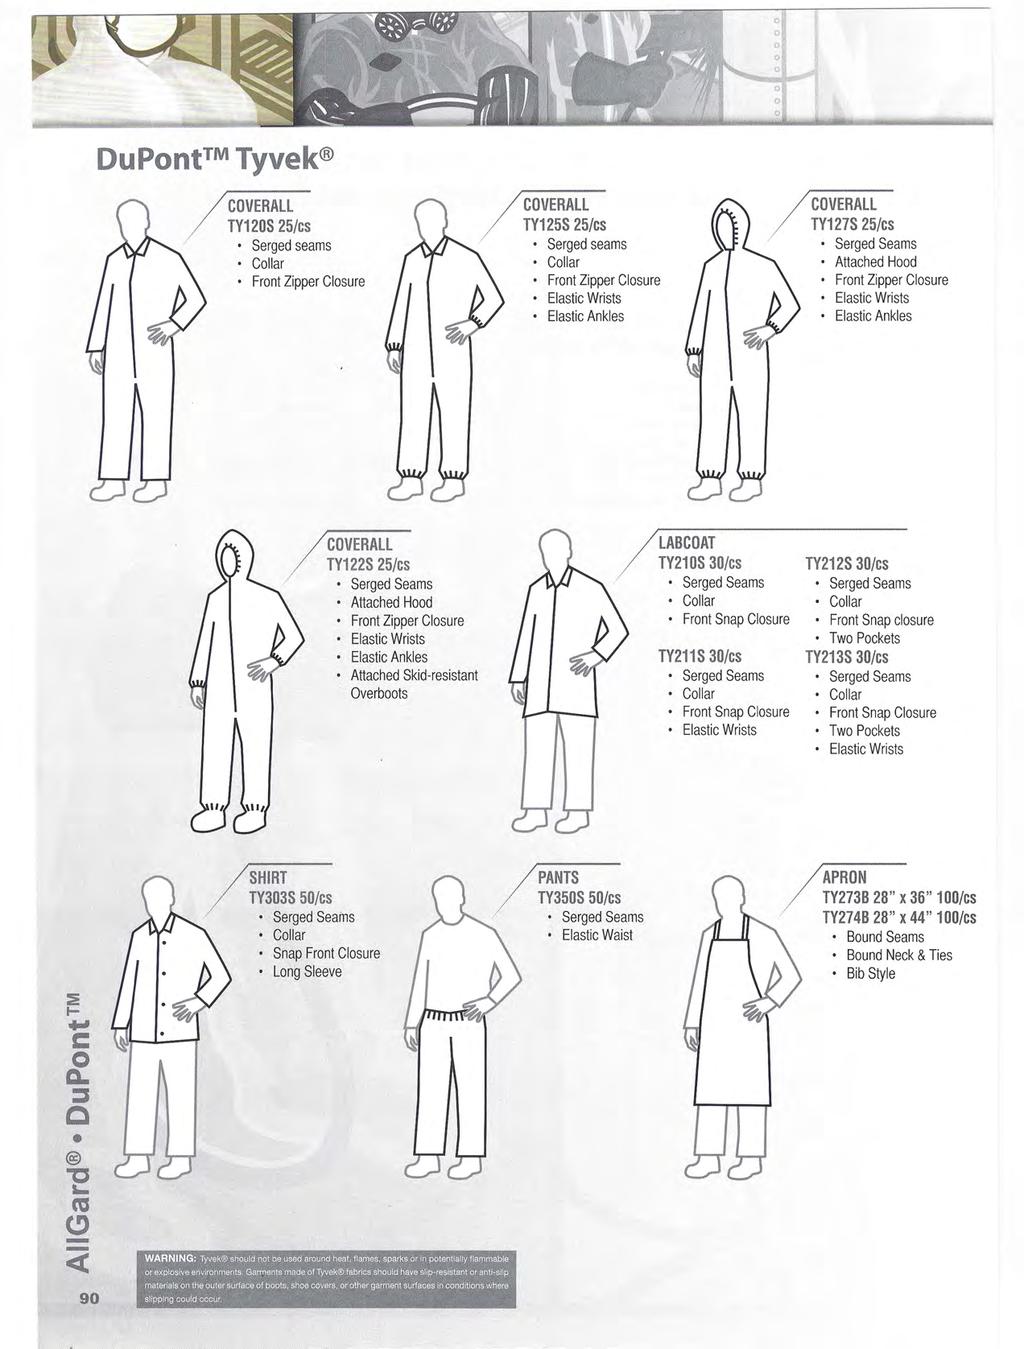 DuPont Tyvek COVERALL TY12S 25/cs Serged seams Collar Front Zipper Closure COVERALL TY125S 25/cs Serged seams Collar Front Zipper Closure Elastic Wrists Elastic Ankles COVERALL TY127S 25/cs Serged